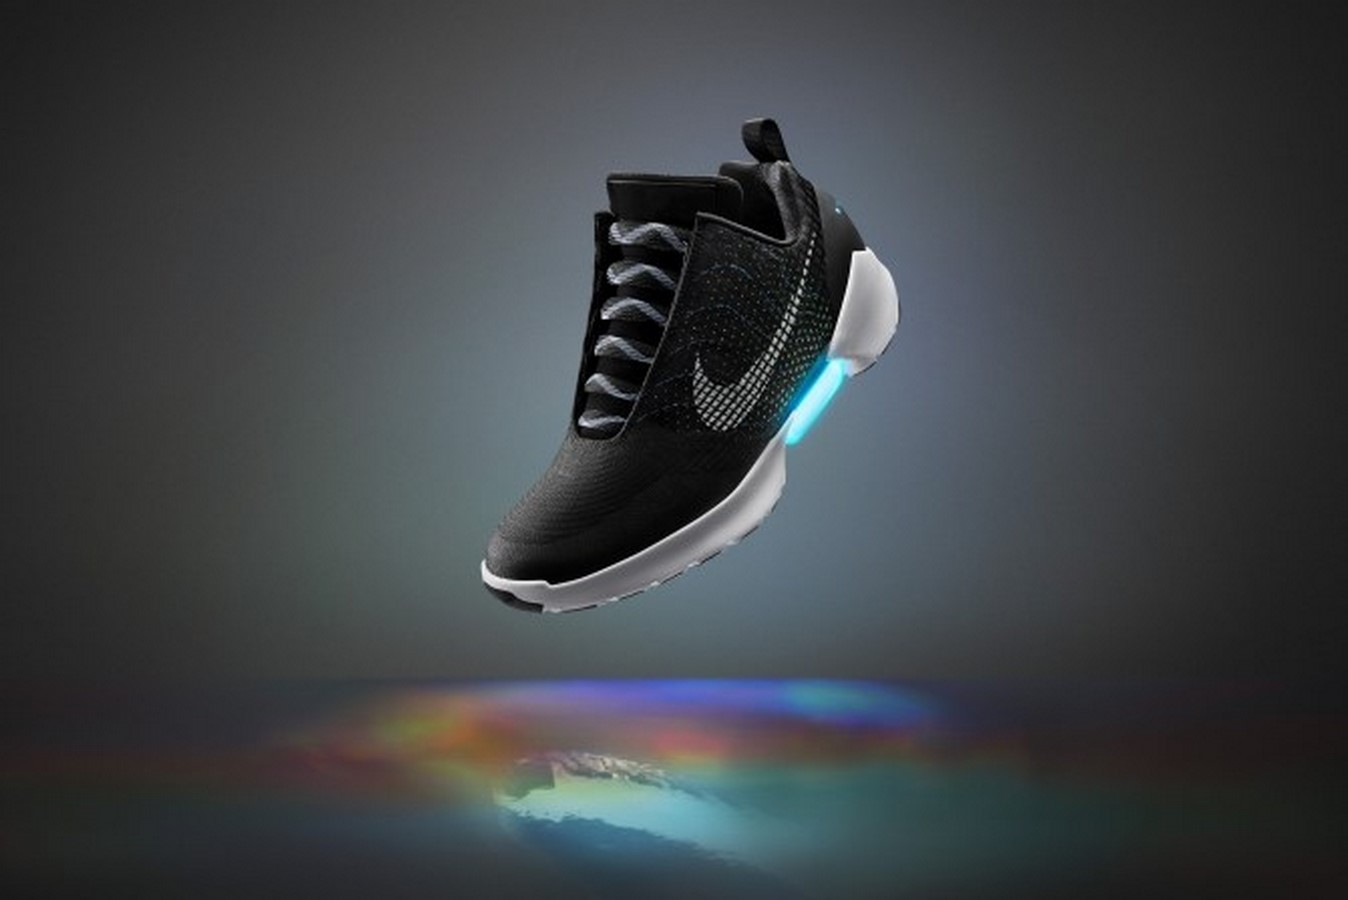 10 Shoe designs from the future Sheet9